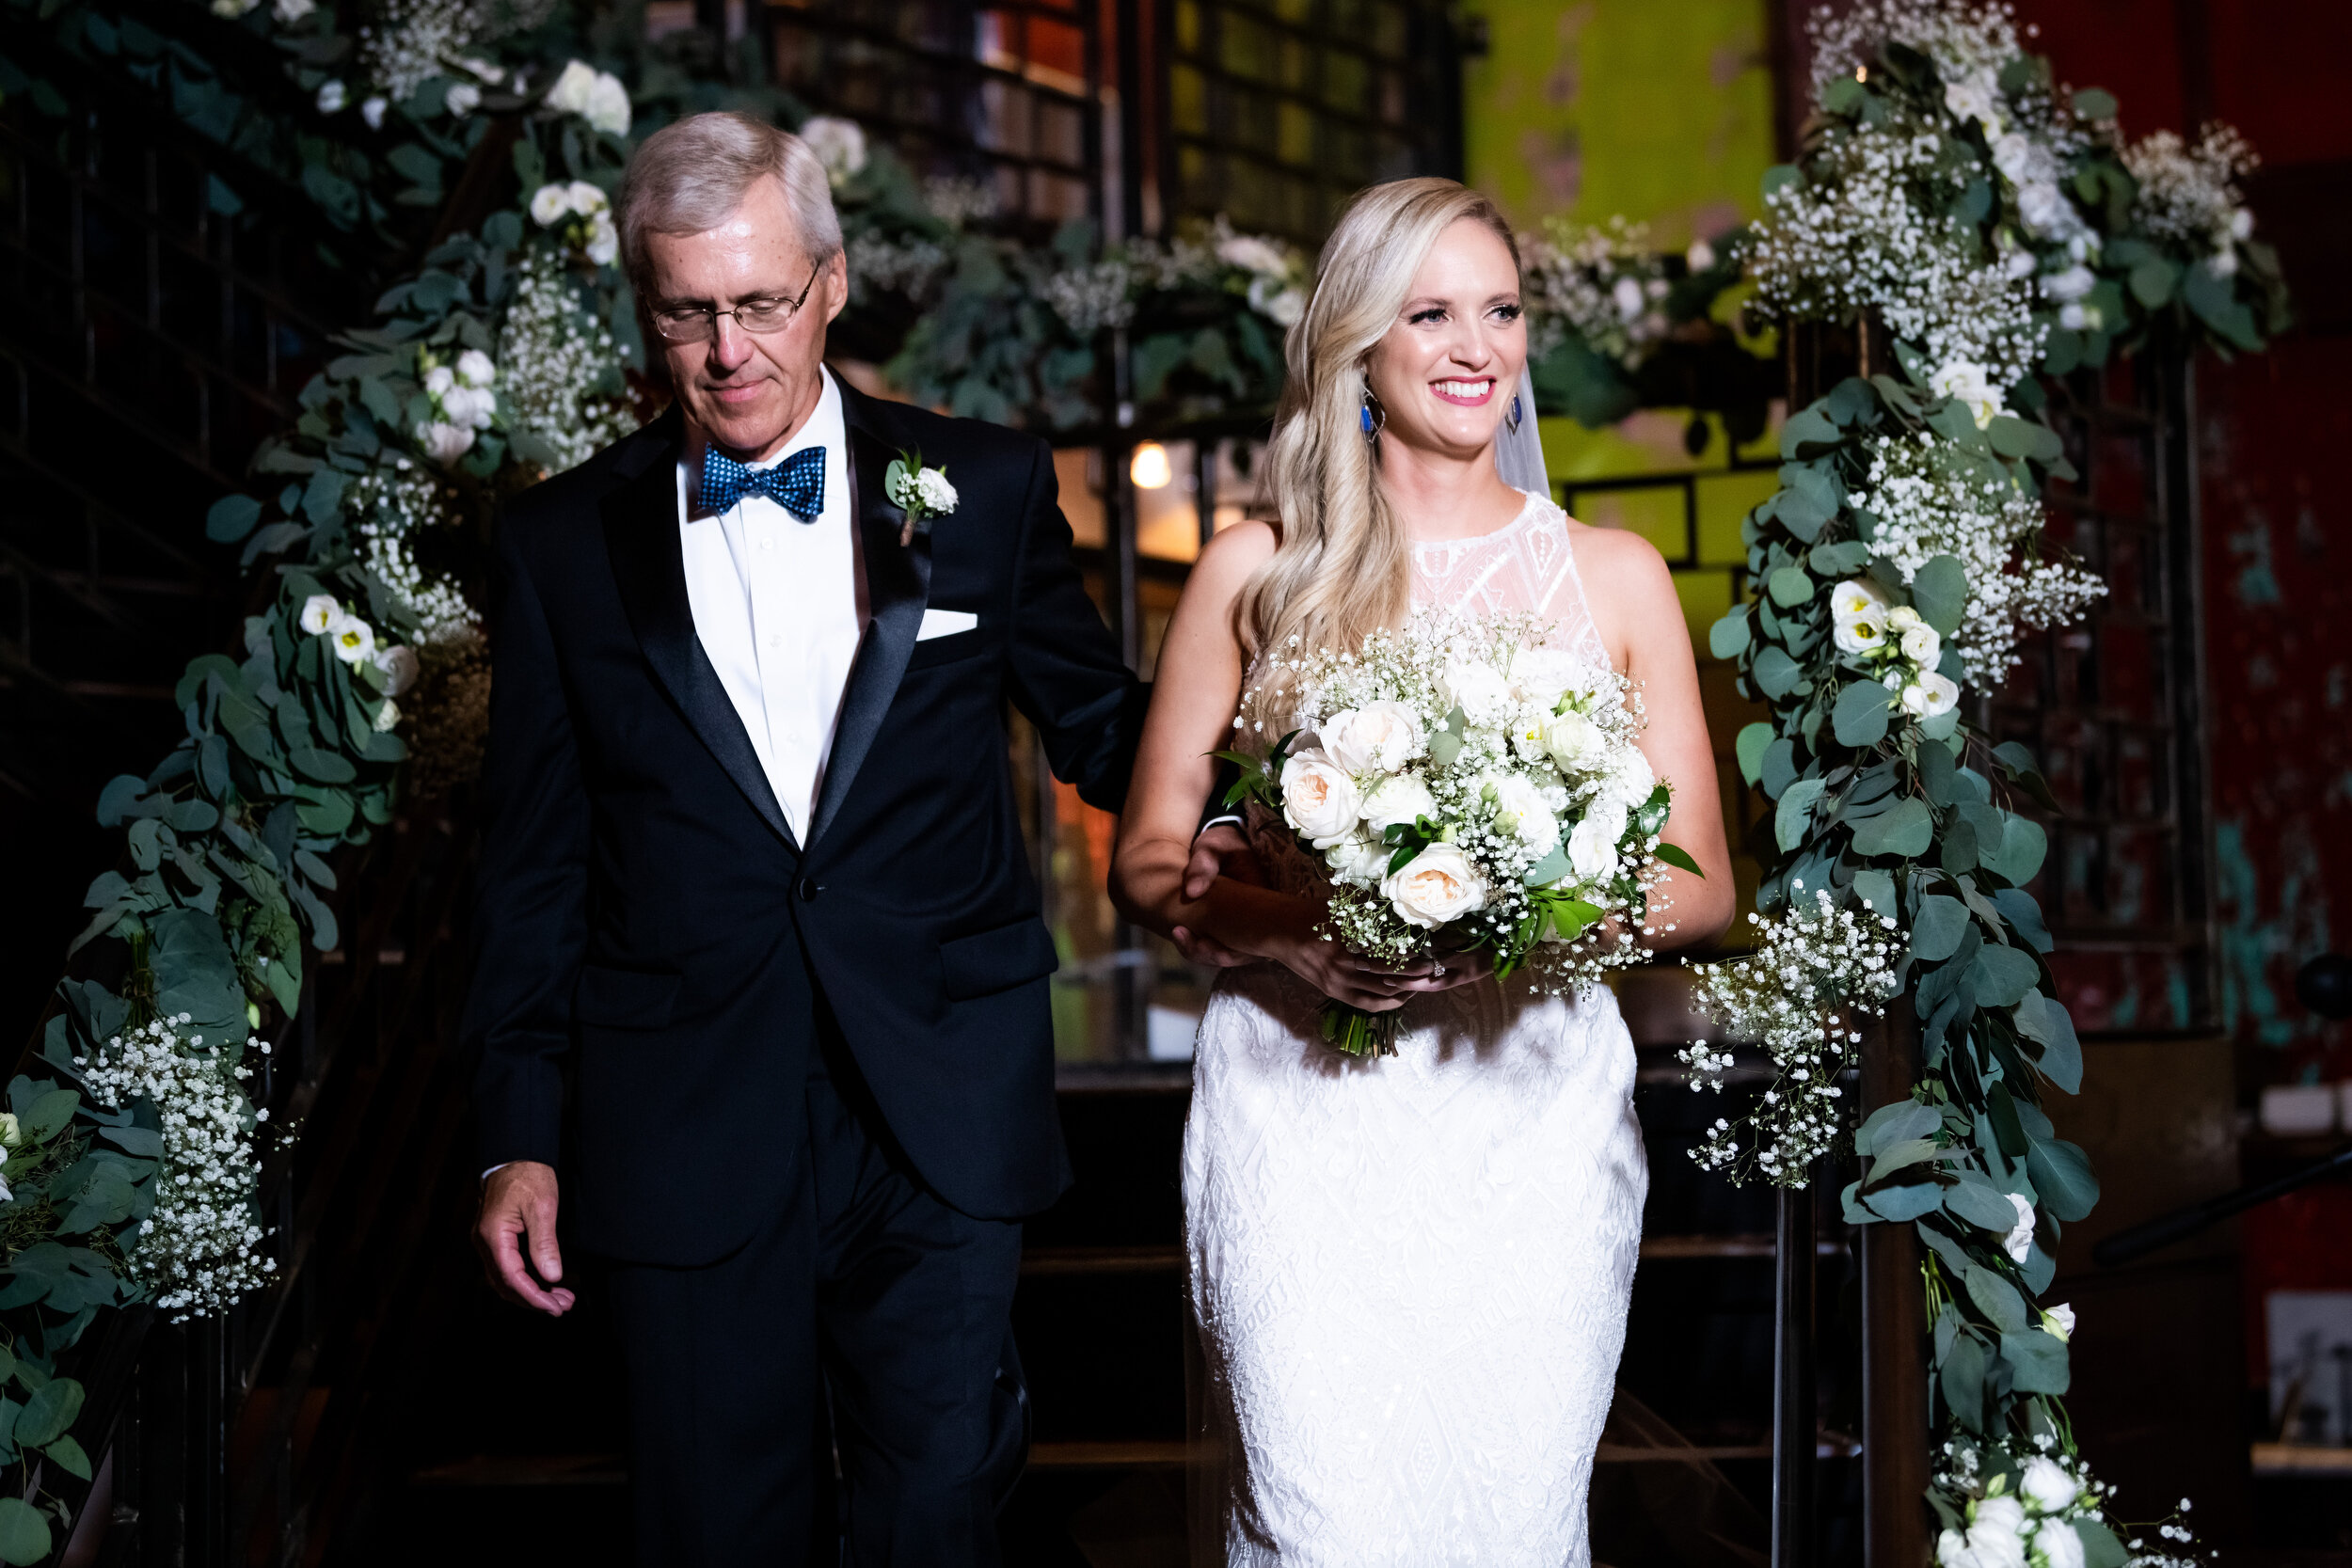 Bride escorted by parents down the aisle: Carnivale Chicago Wedding captured by J. Brown Photography